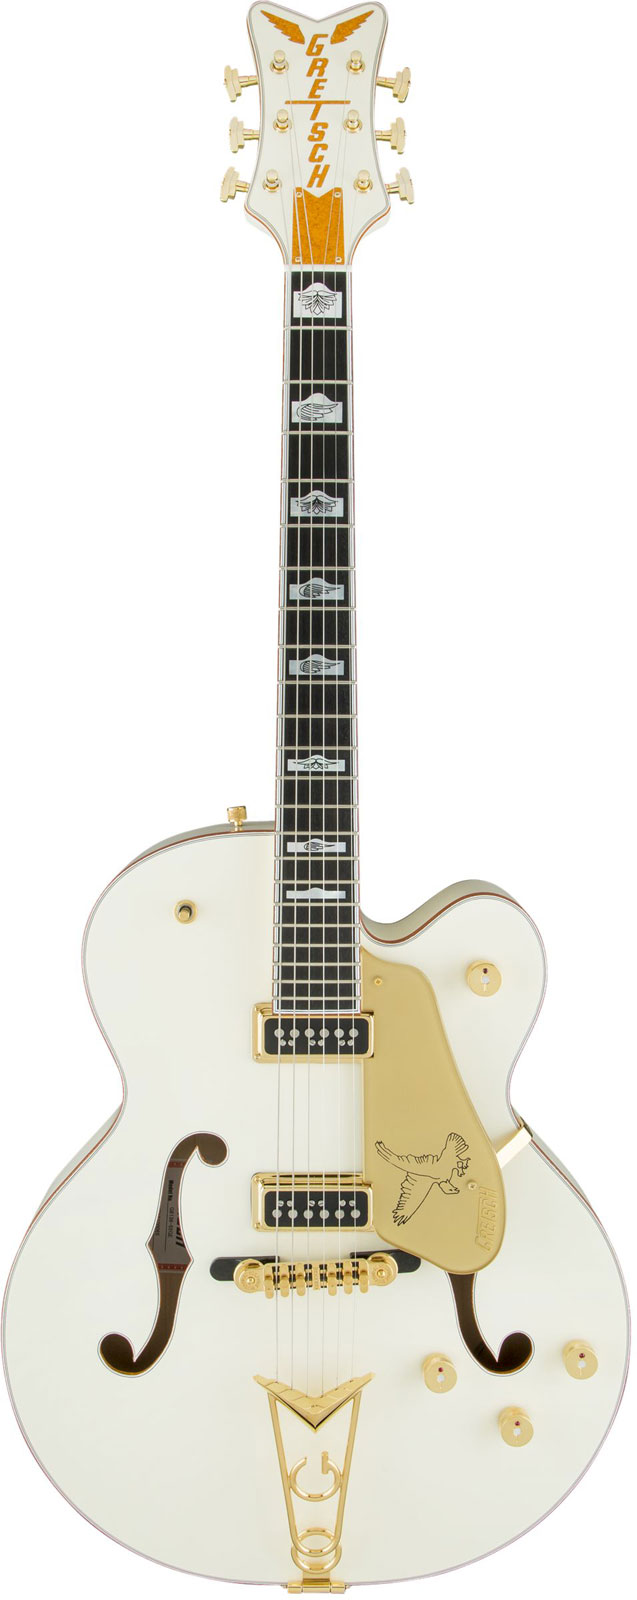 GRETSCH GUITARS G6136-55 VINTAGE SELECT EDITION '55 FALCON HOLLOW BODY WITH CADILLAC TAILPIECE, TV JONES, SOLID SPRU